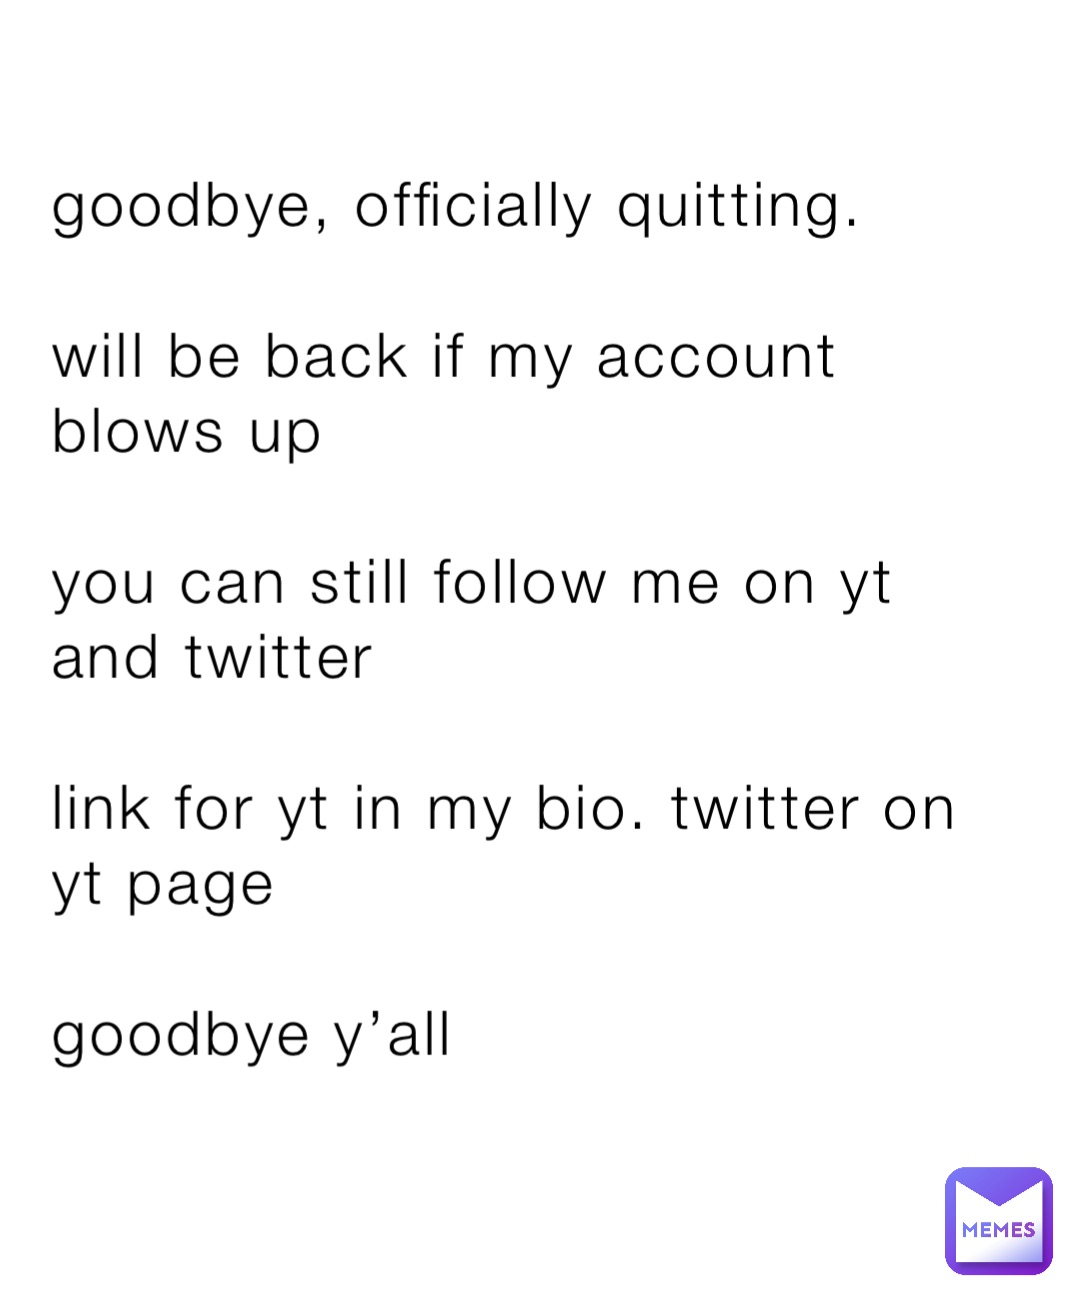 goodbye, officially quitting.

will be back if my account blows up 

you can still follow me on yt and twitter

link for yt in my bio. twitter on yt page

goodbye y’all